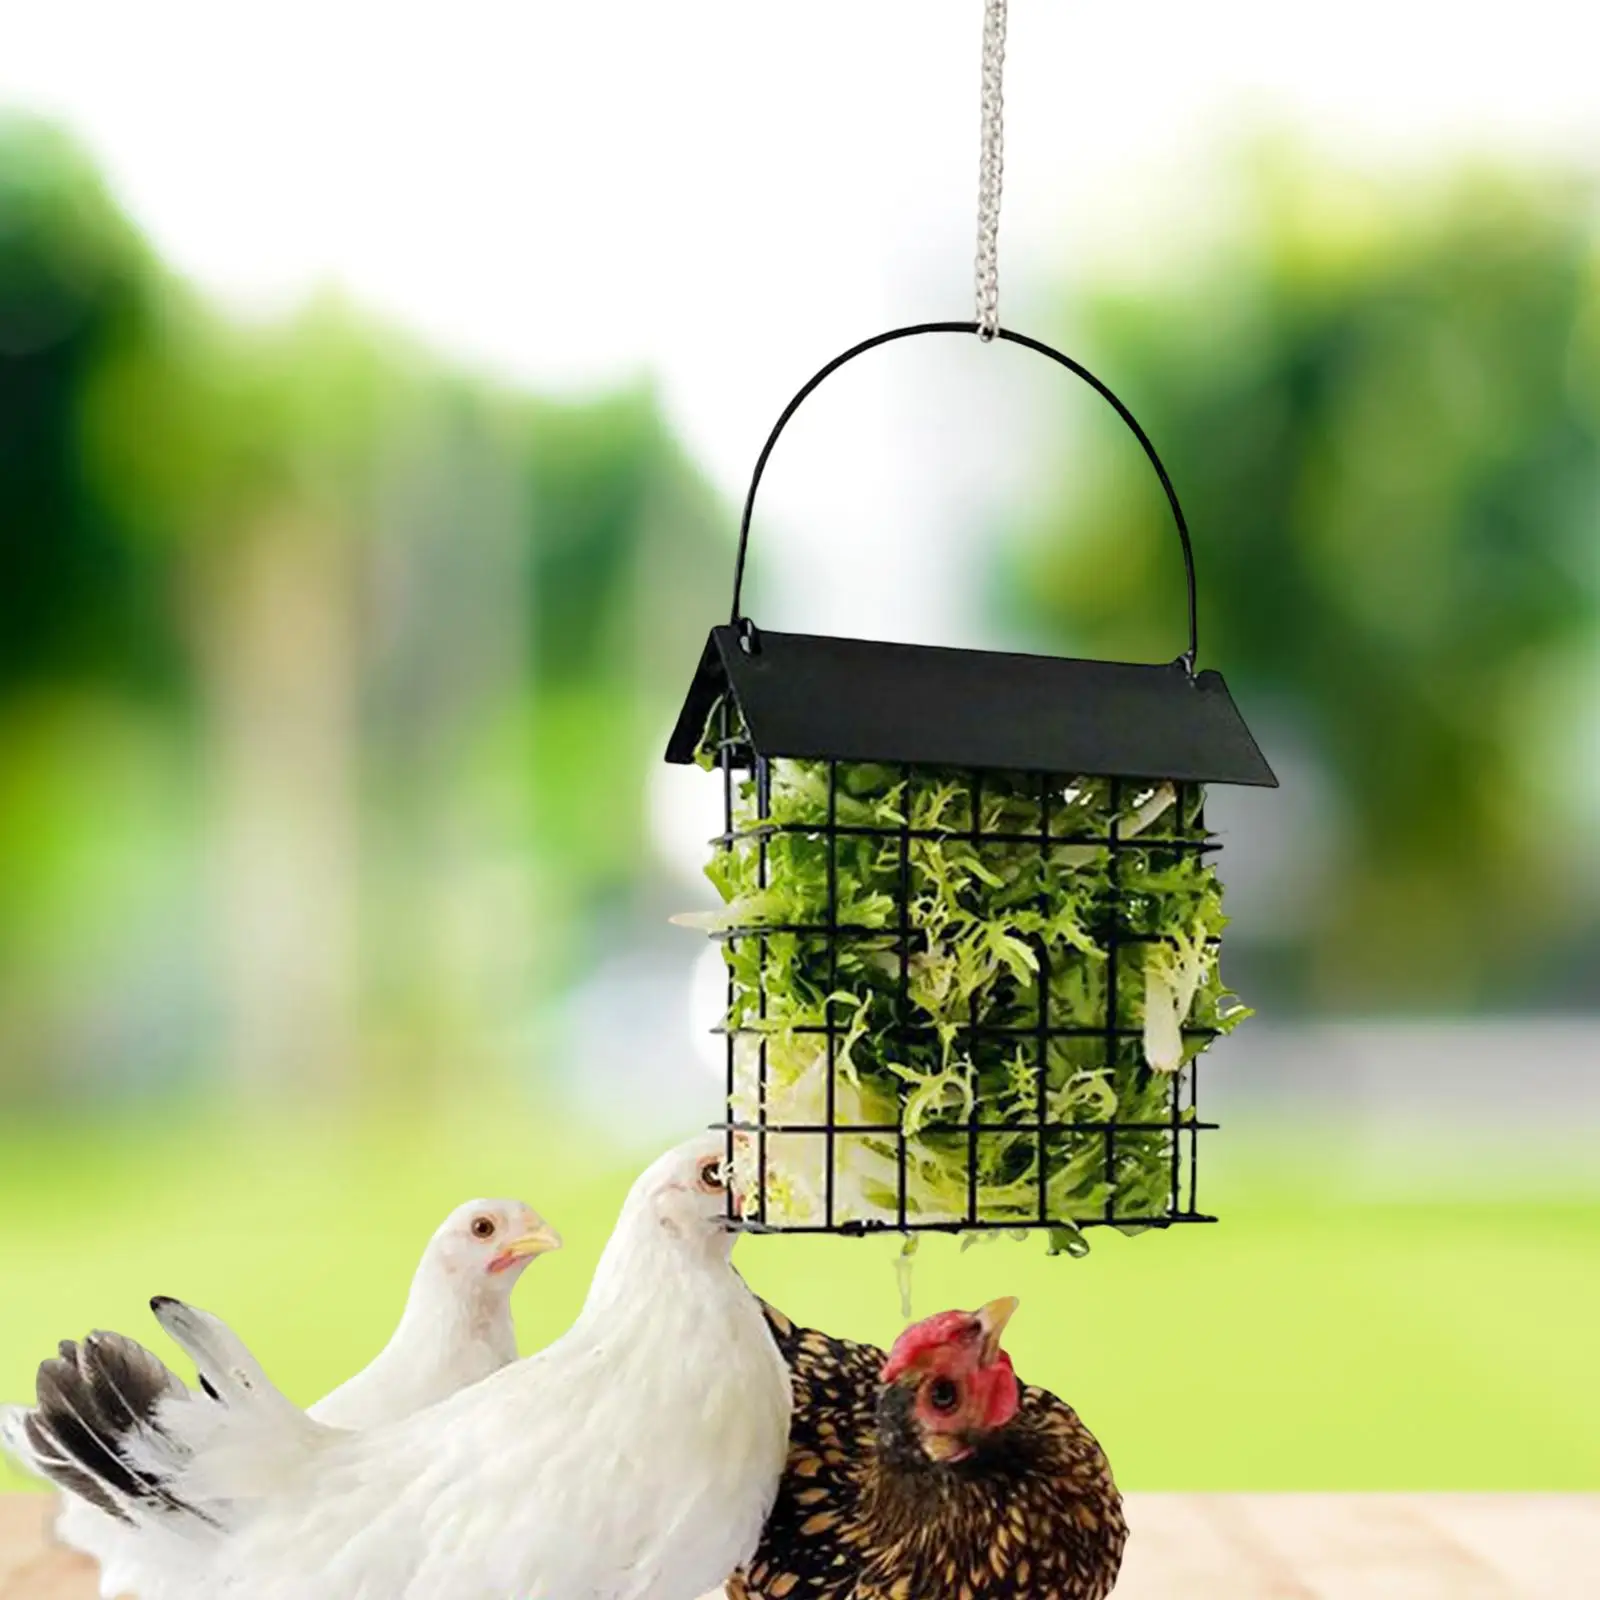 Suet Cake Bird Feeders Hanging Feeder for Hens Chicken Toy Treat Feeding Tool Poultry Fruit Holde for Cabbage Lettuce Veggies